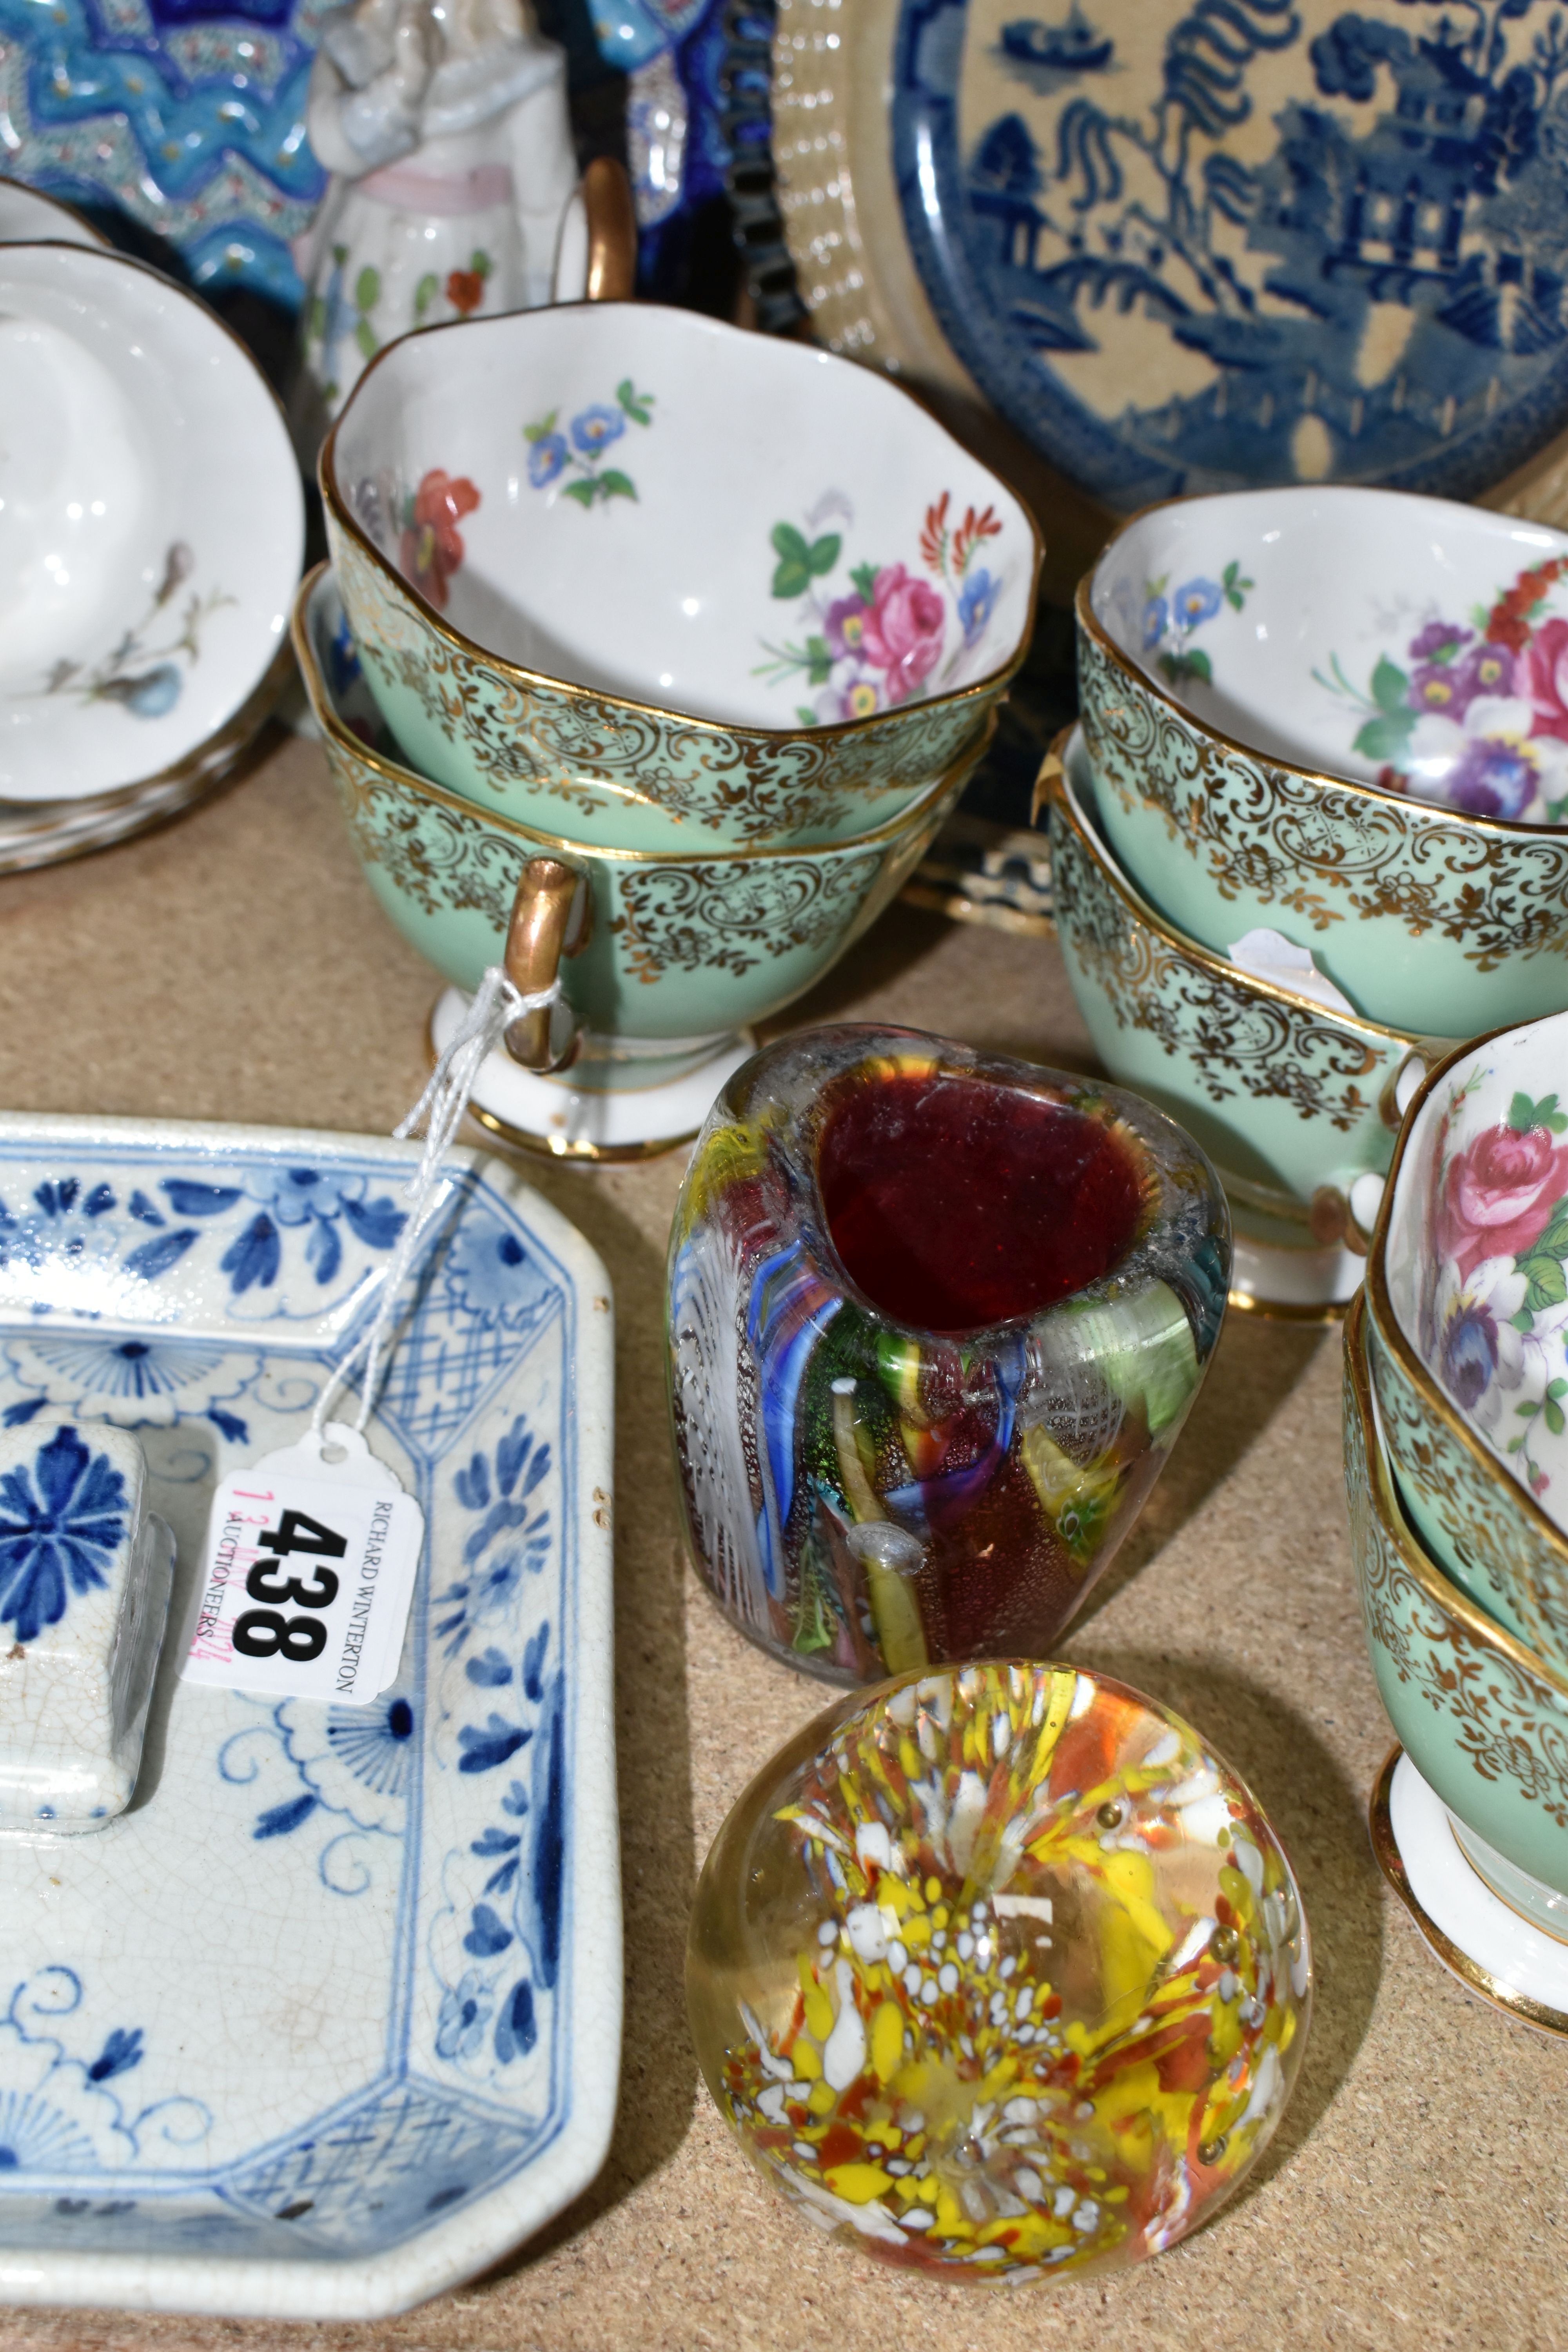 A VARIETY OF CERAMICS AND GLASSWARE INCLUDING A ROYAL ALBERT TEA SET, A VICTORIAN GLASS DUMP - Image 3 of 6